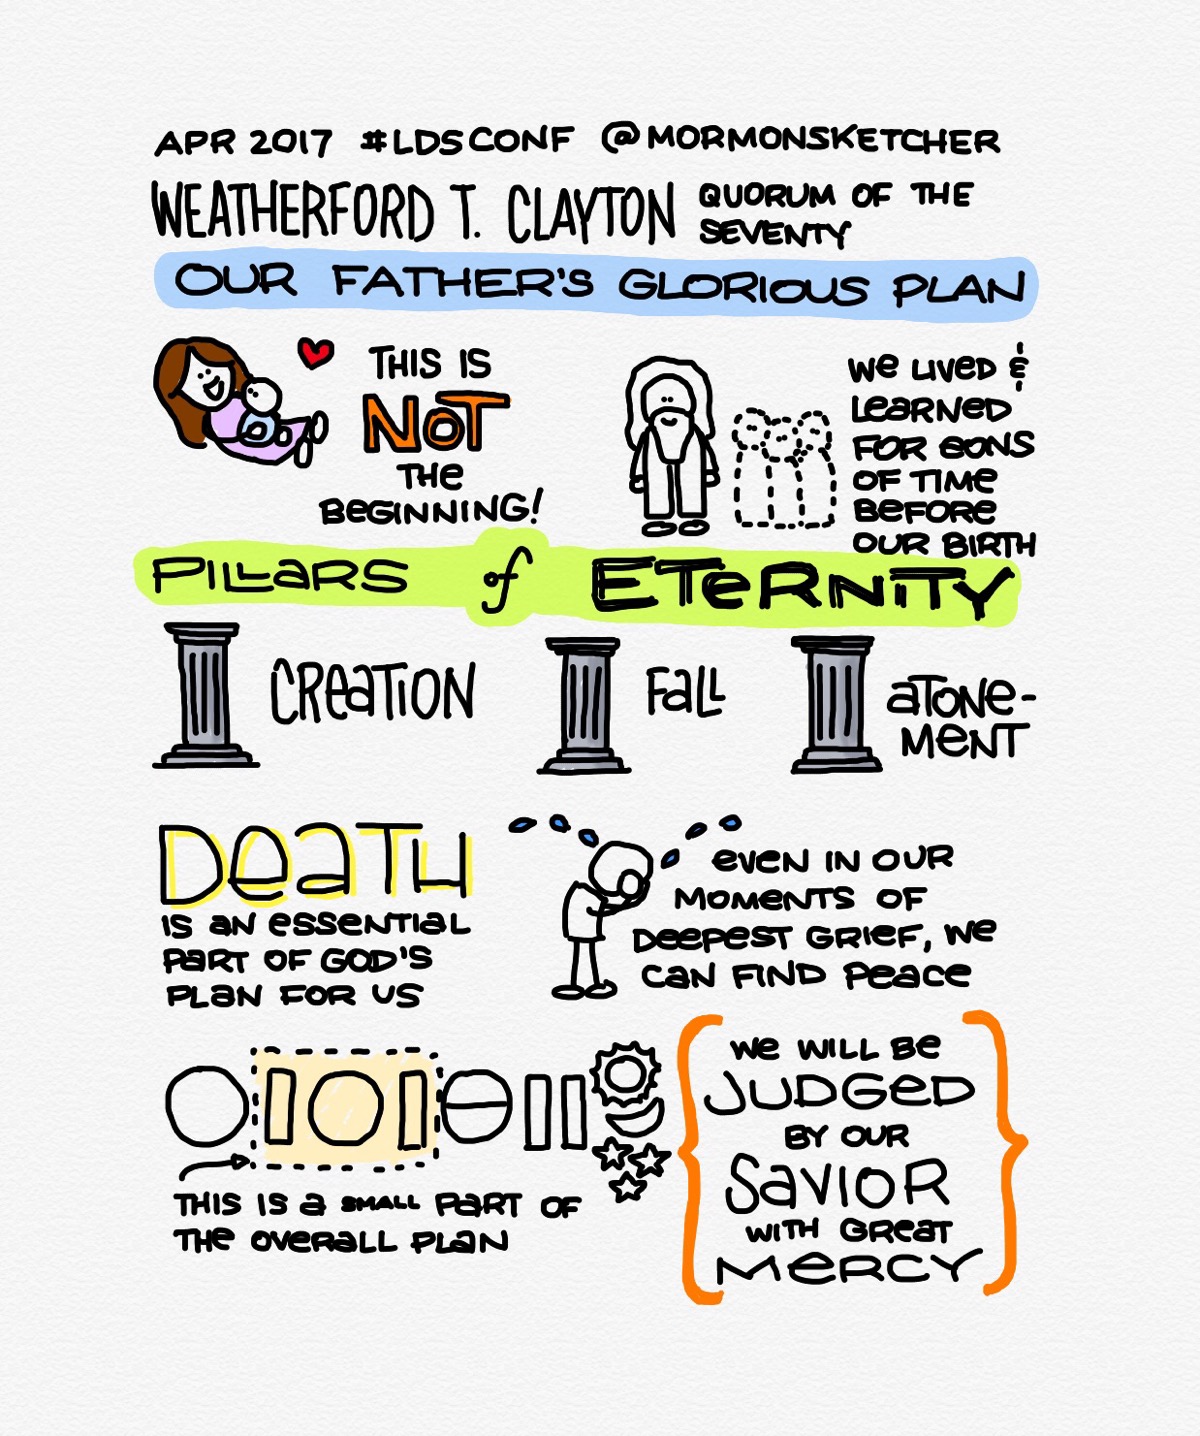 Weatherford T Clayton Conference Sketchnotes